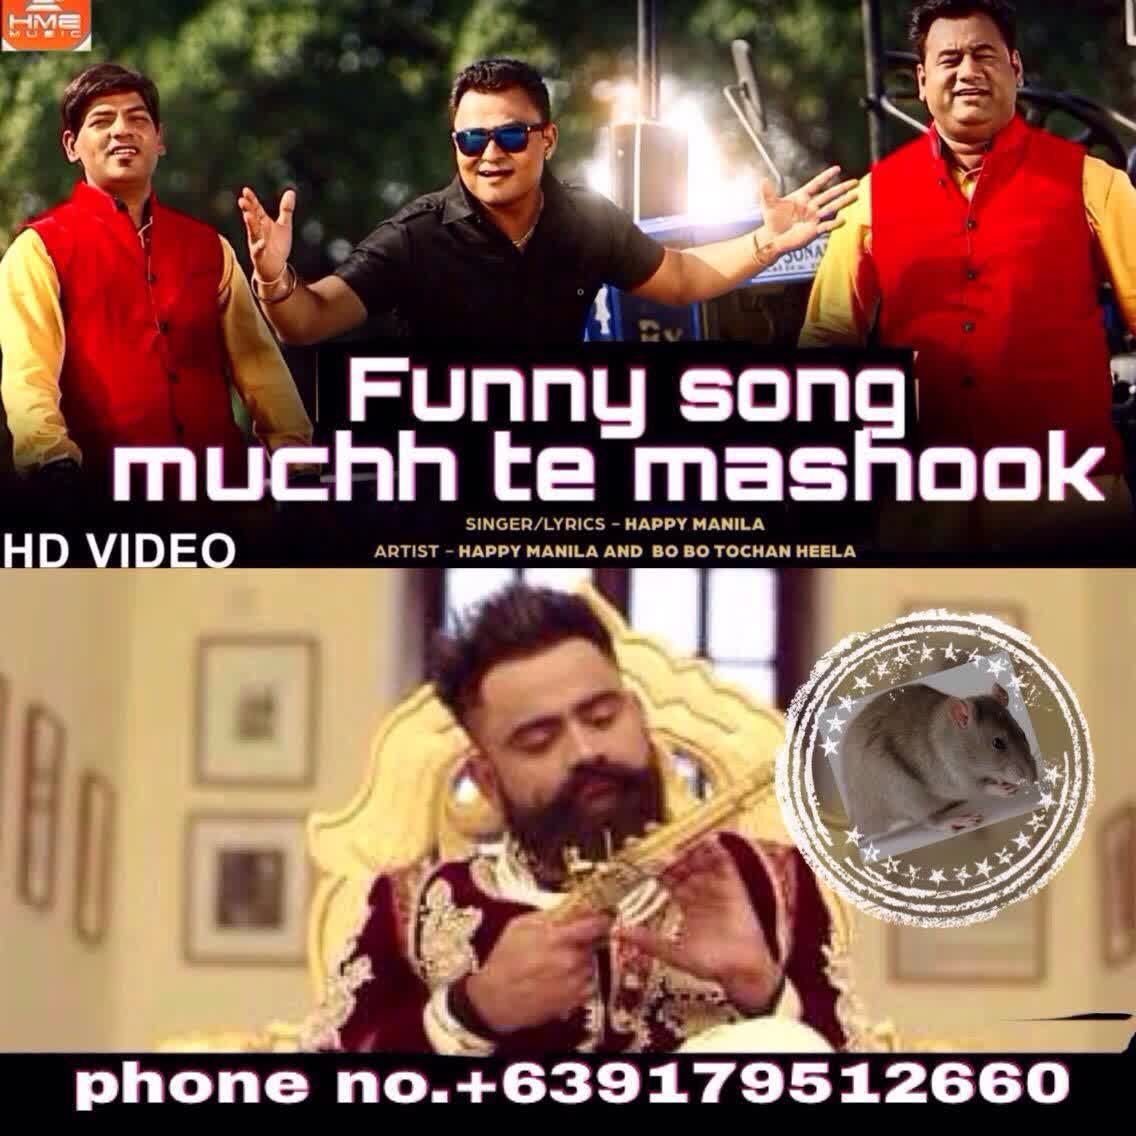 Muchh Te Mashook Funny Song Happy Manila  Mp3 song download